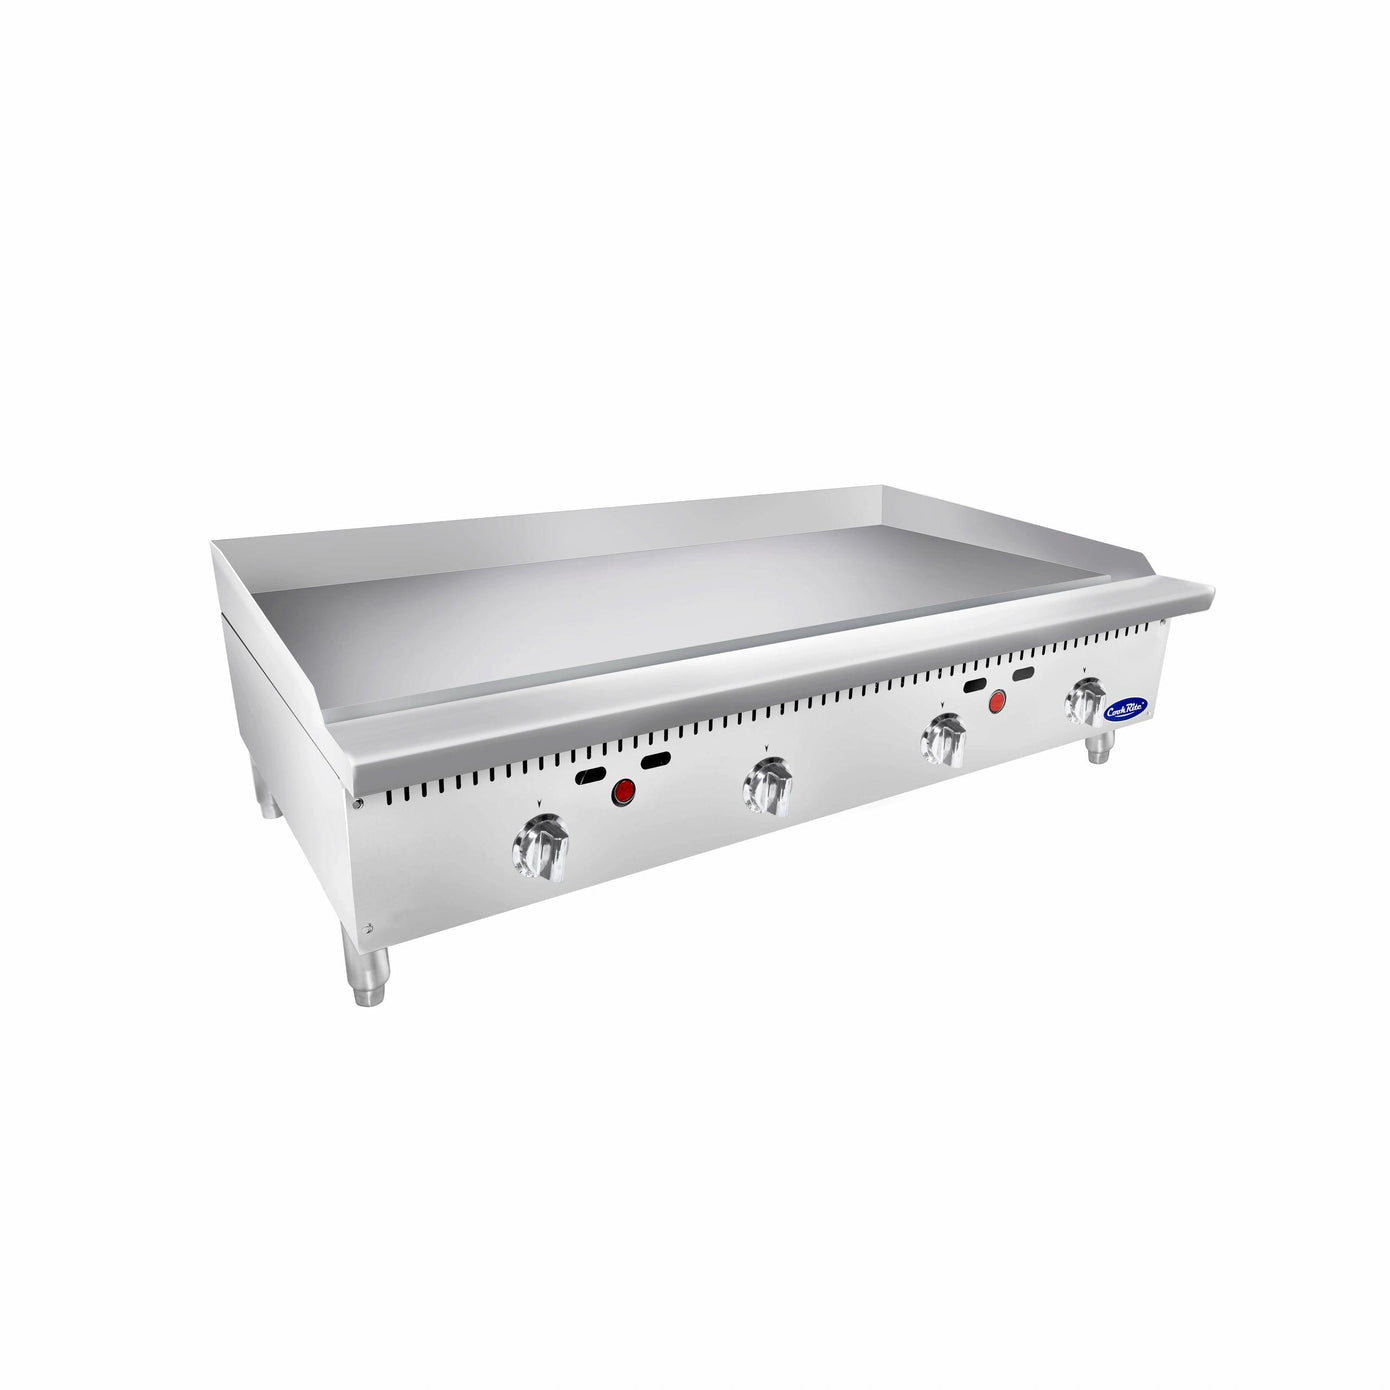 Atosa USA ATTG-48 48-Inch Thermostatically Controlled Griddle NG